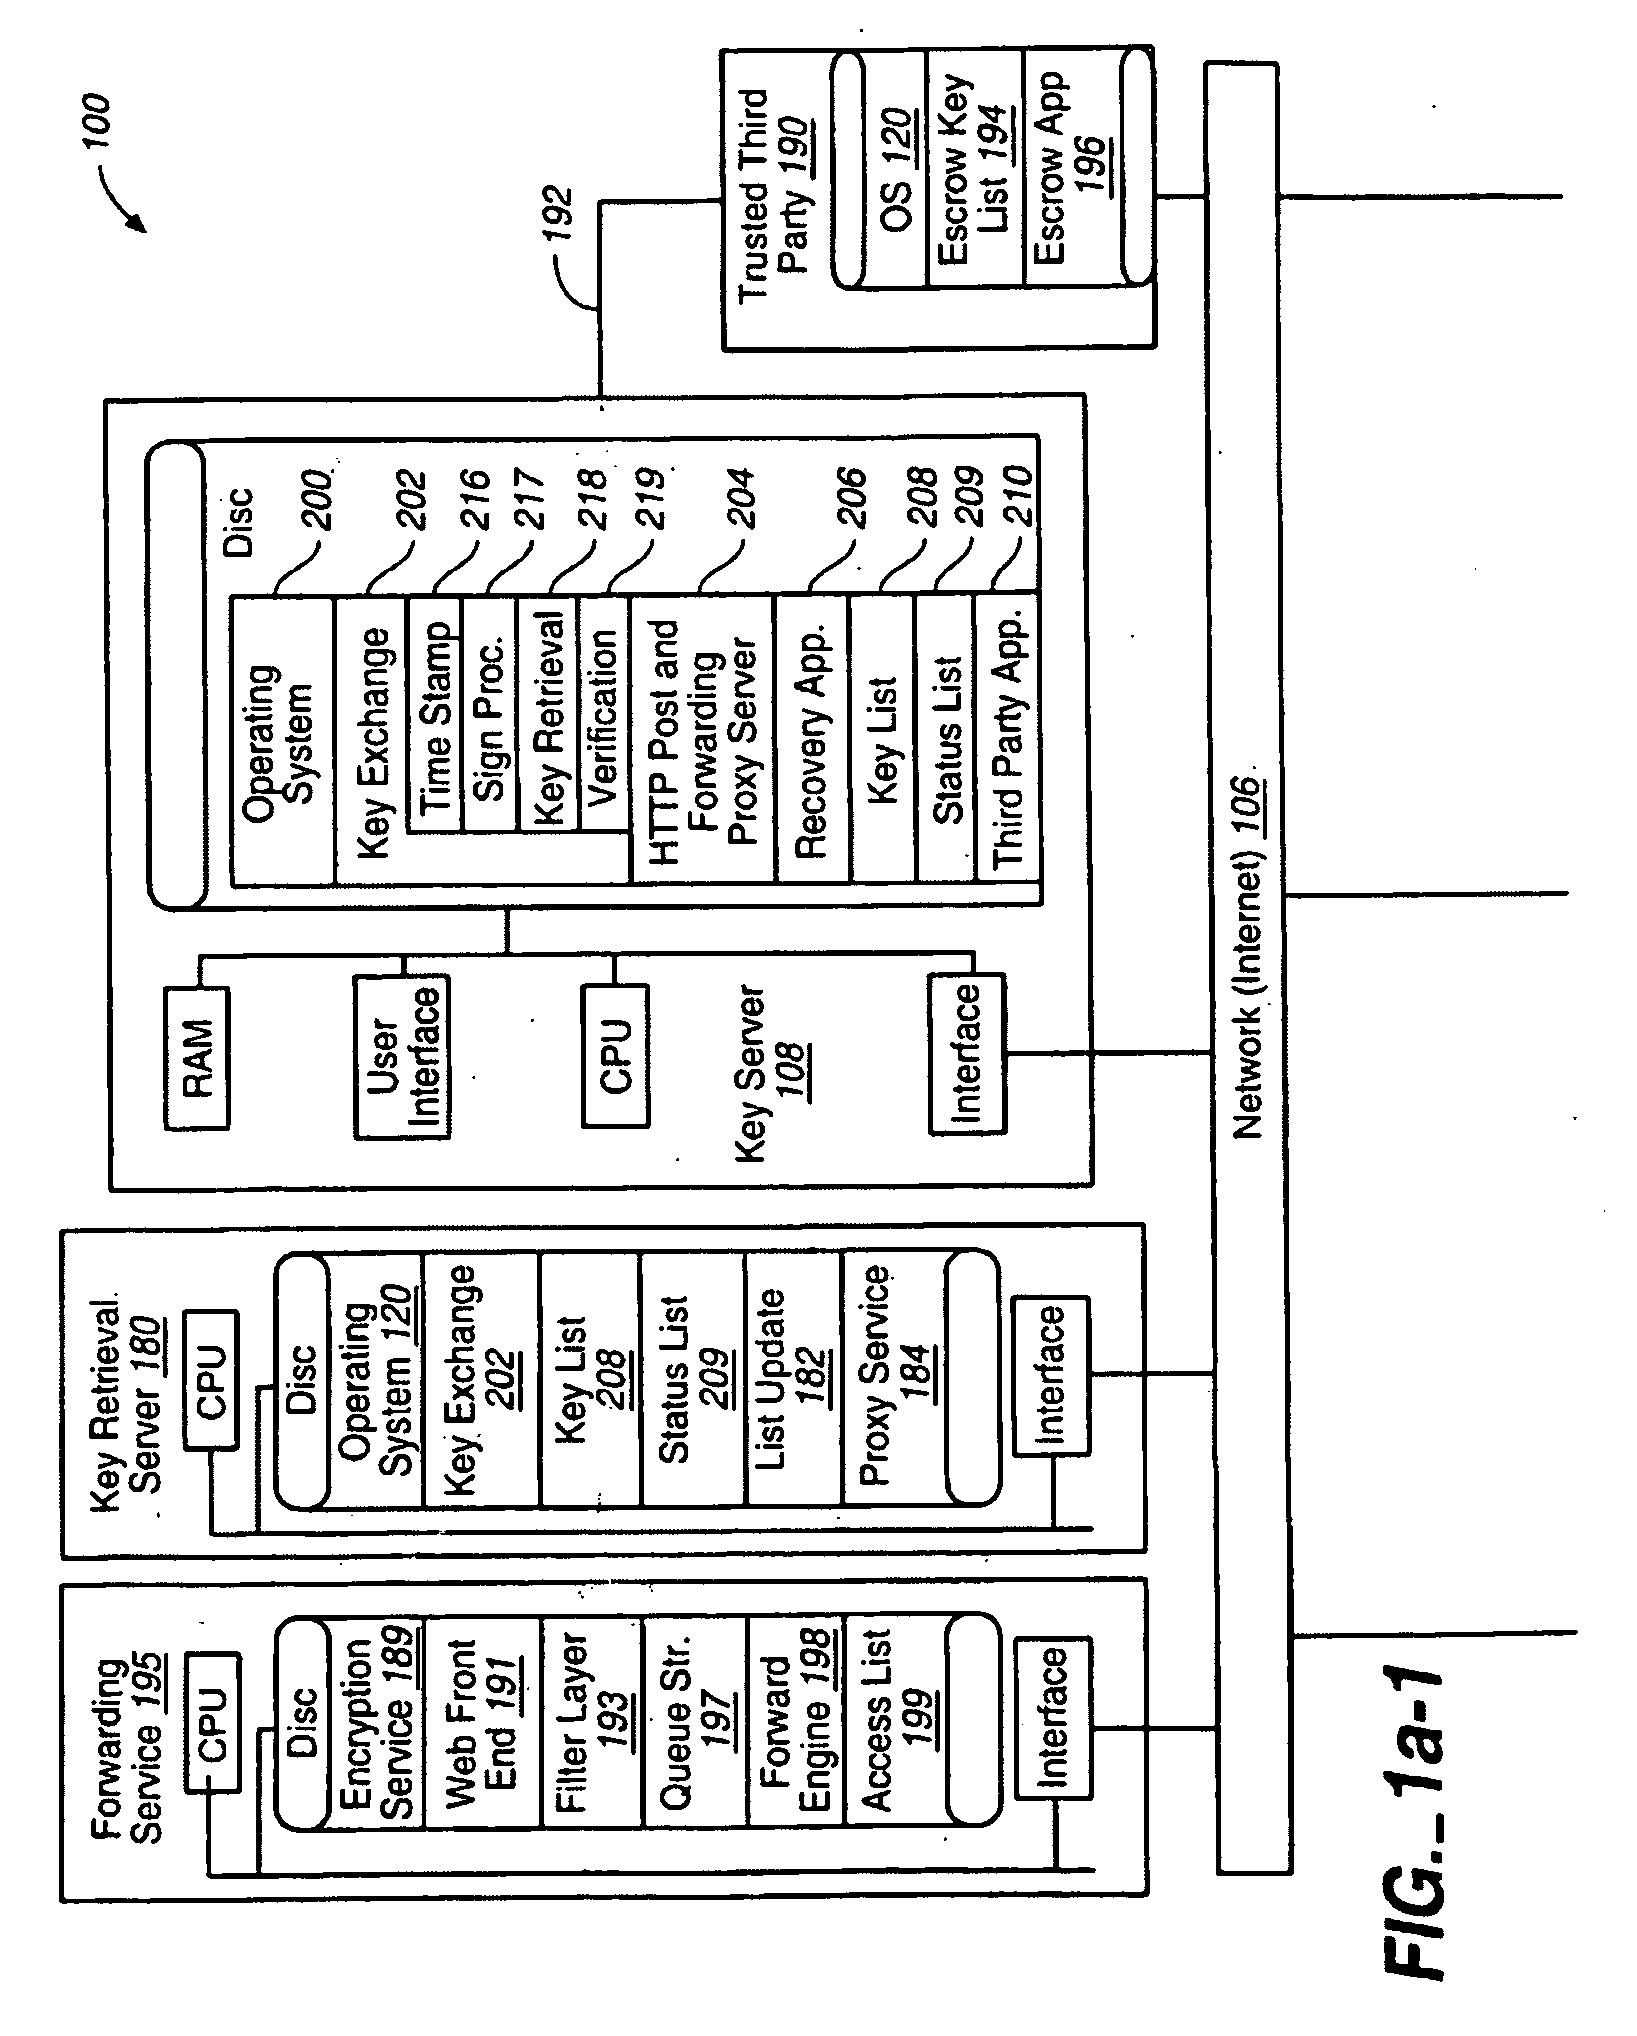 Secure message forwarding system detecting user's preferences including security preferences